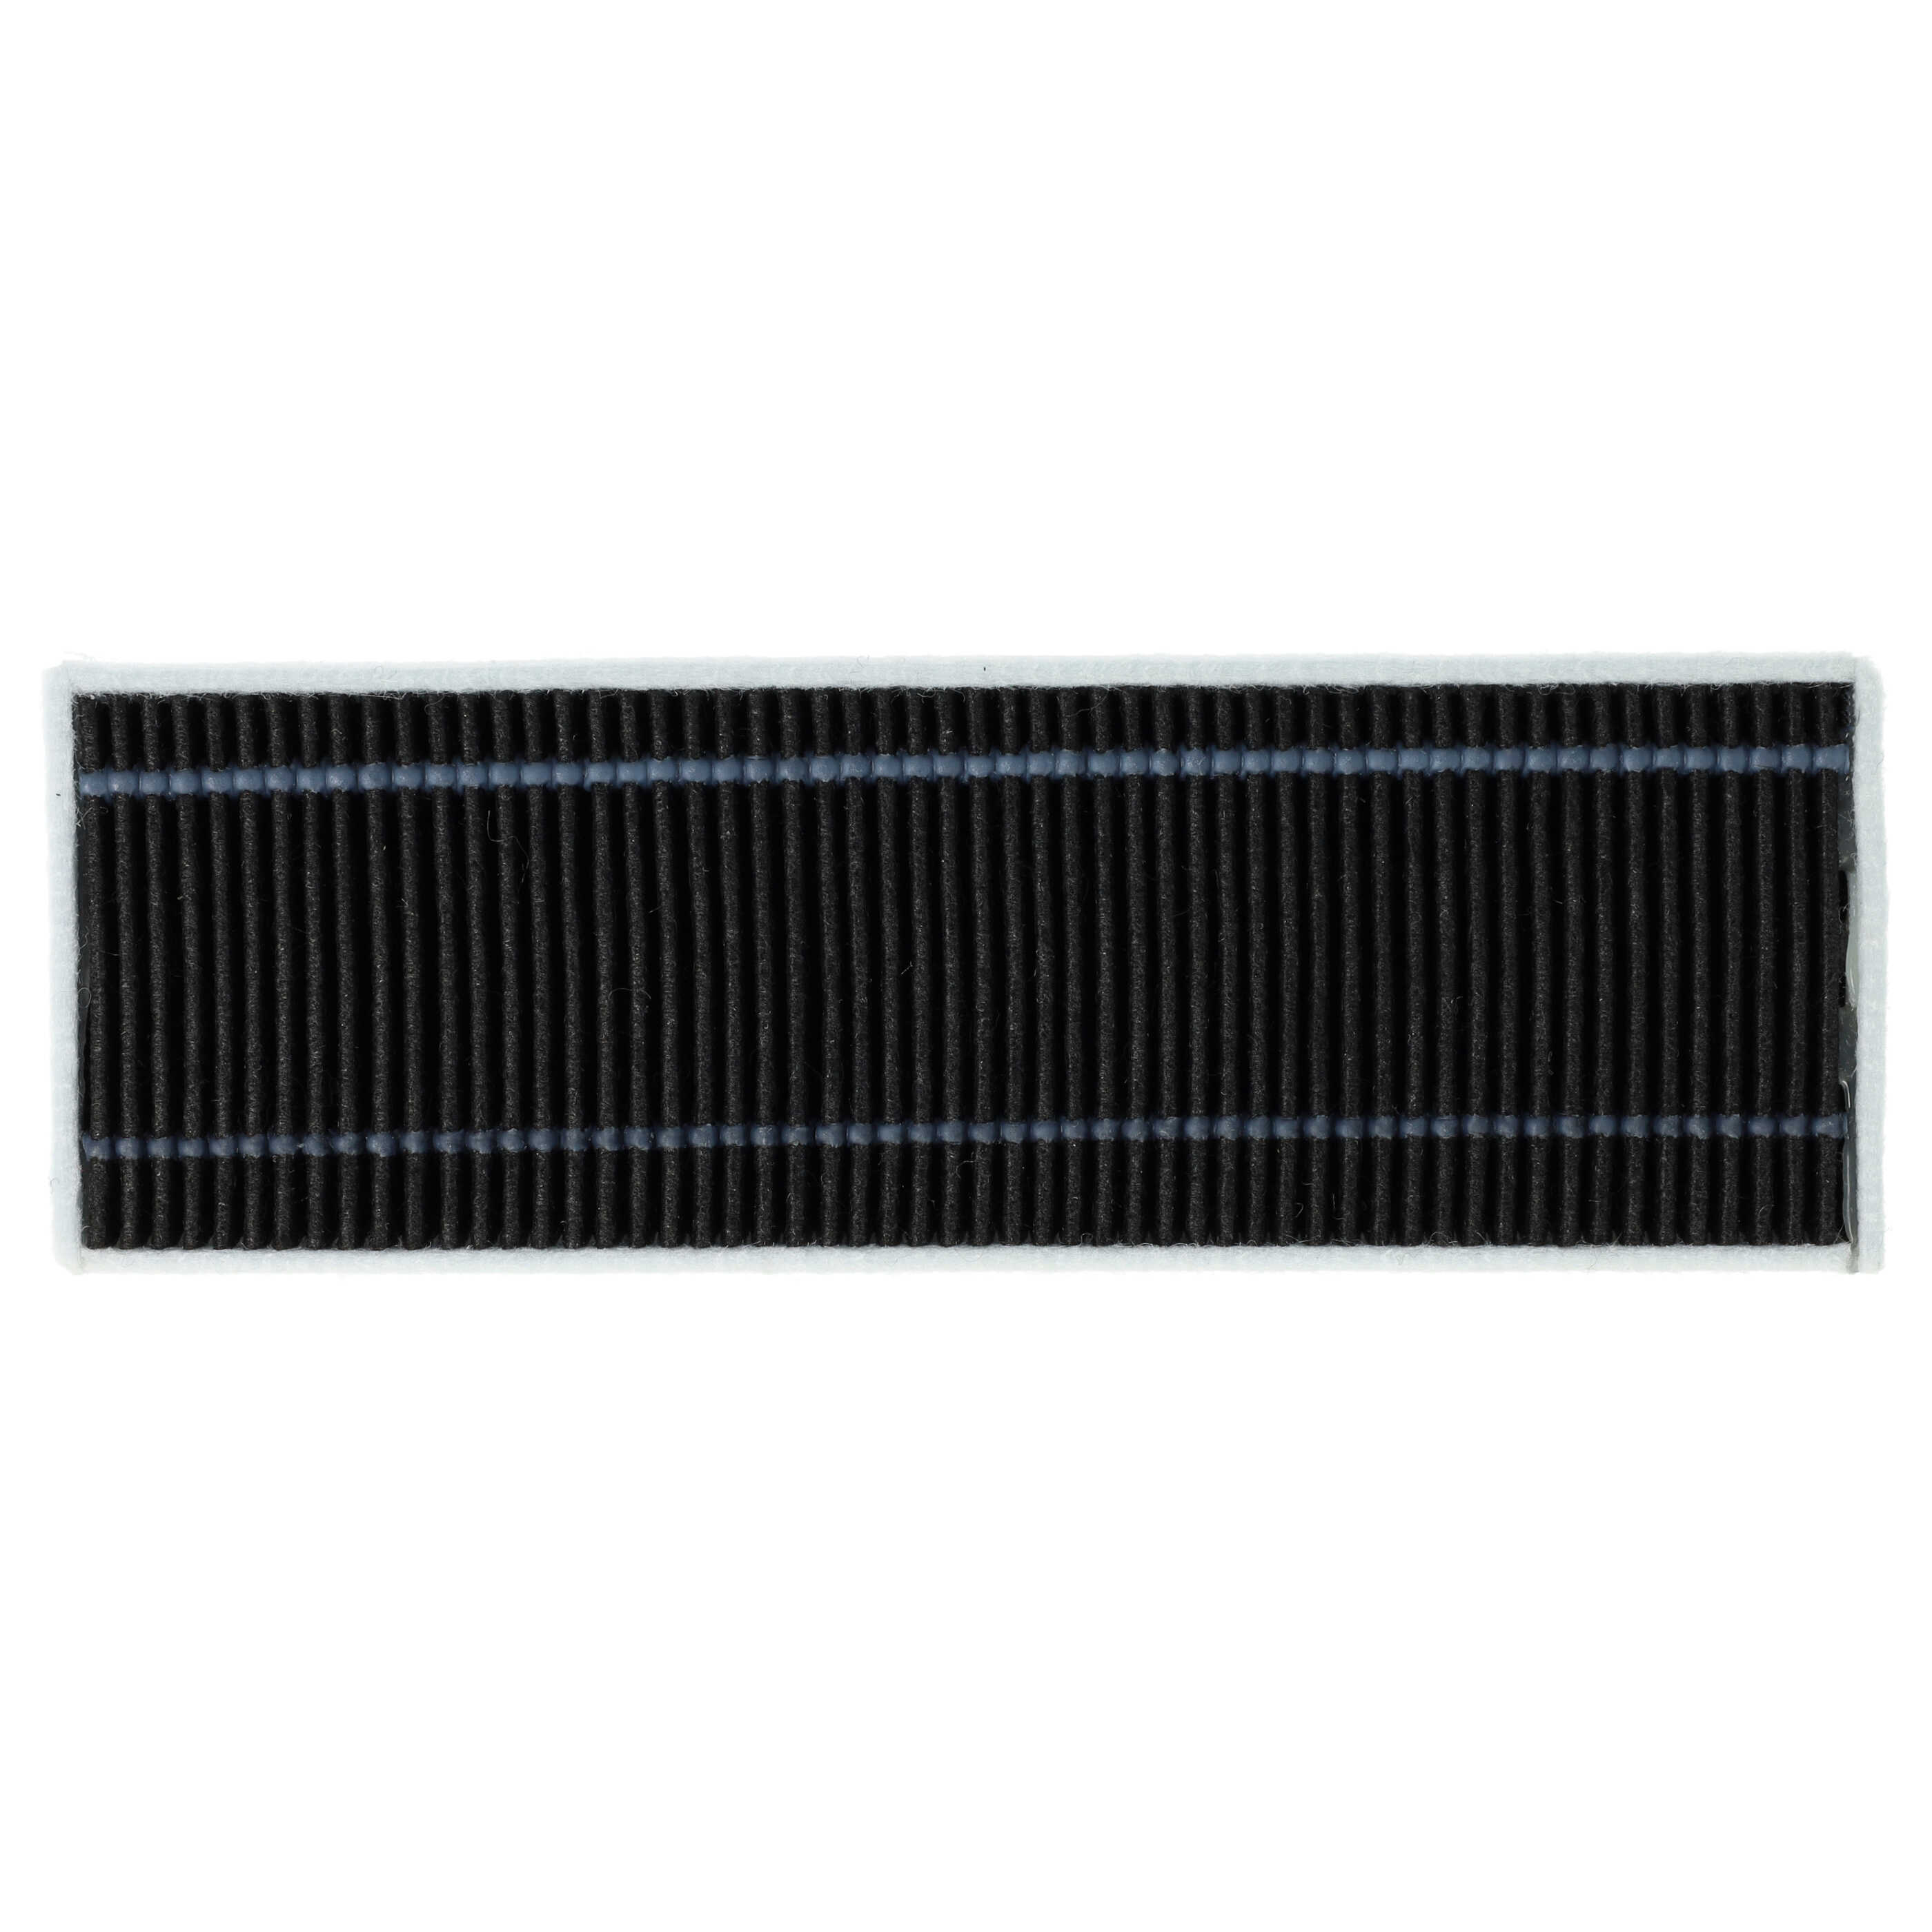 2x Active Carbon Filter suitable for M7 Proscenic, Cecotec, Xiaomi M7 Robot and Others - 13 x 4 x 1 cm